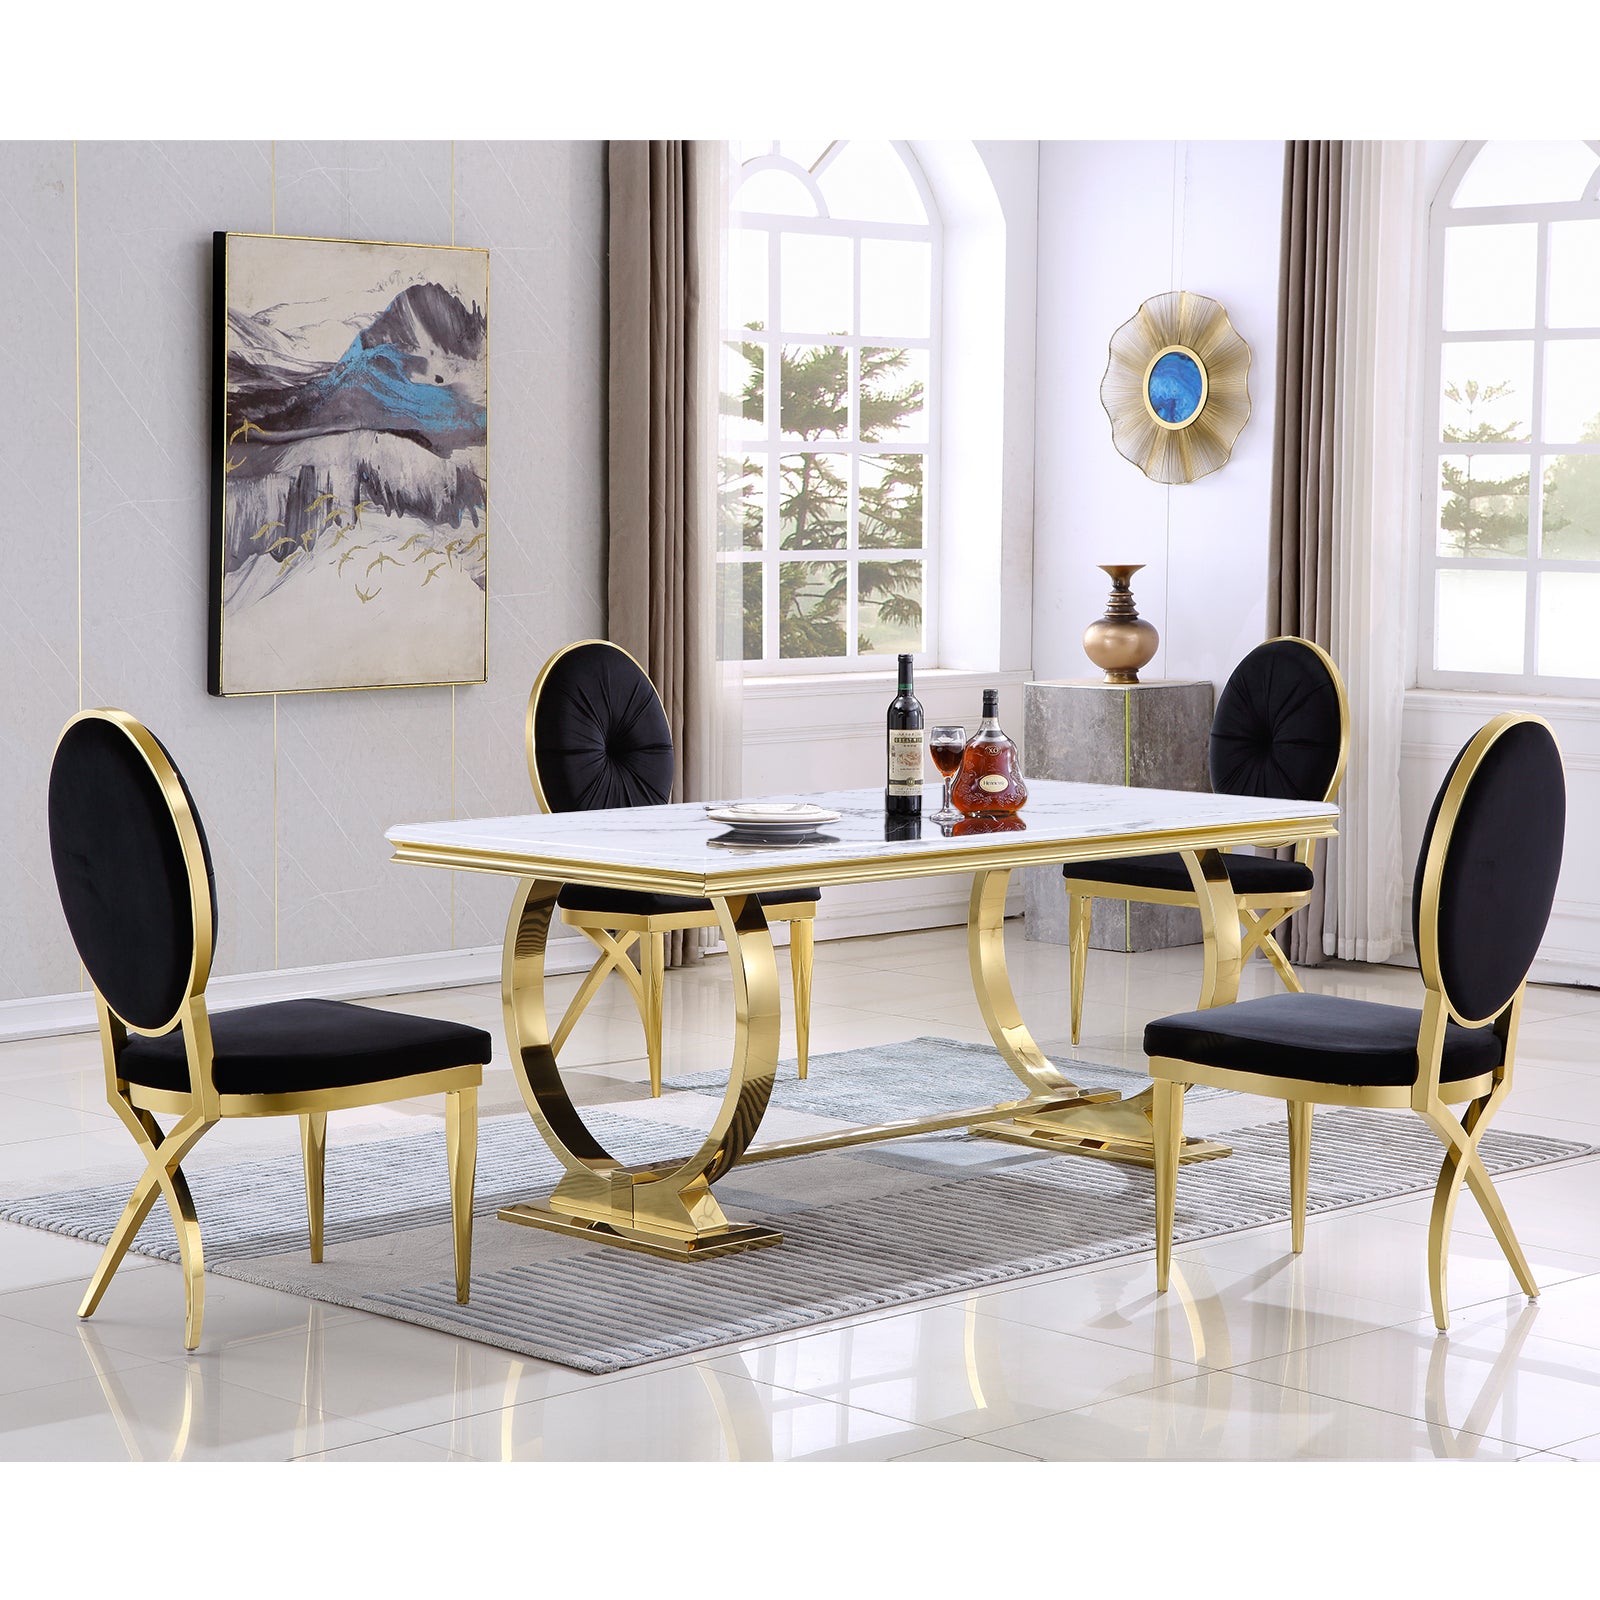 Wholesale Black King Louis dining chairs